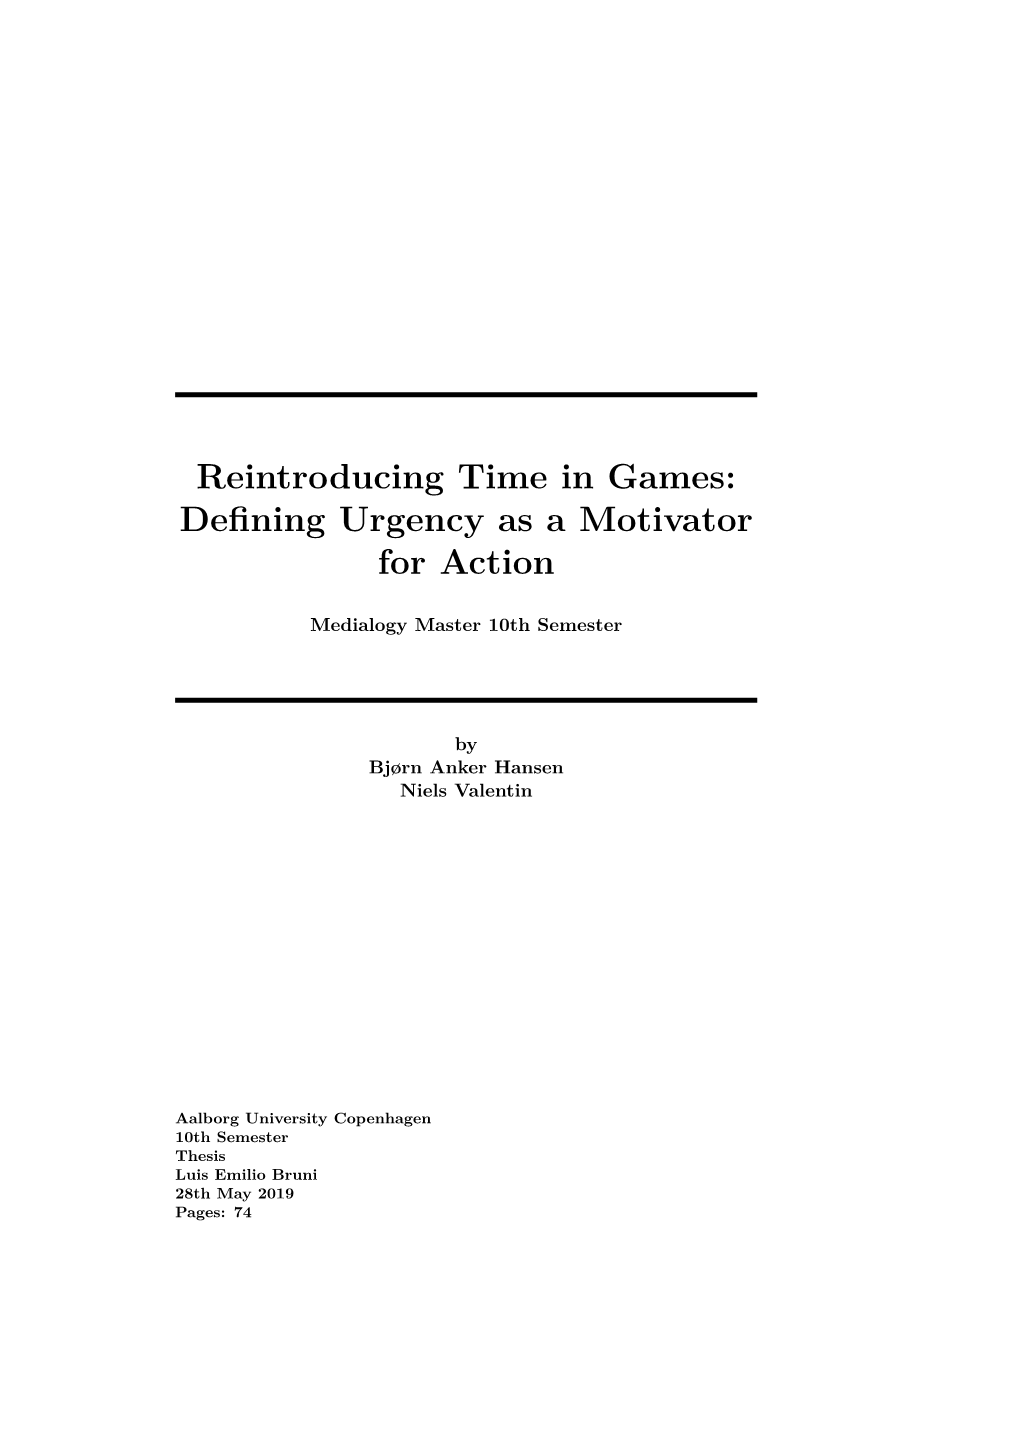 Reintroducing Time in Games: Defining Urgency As a Motivator For